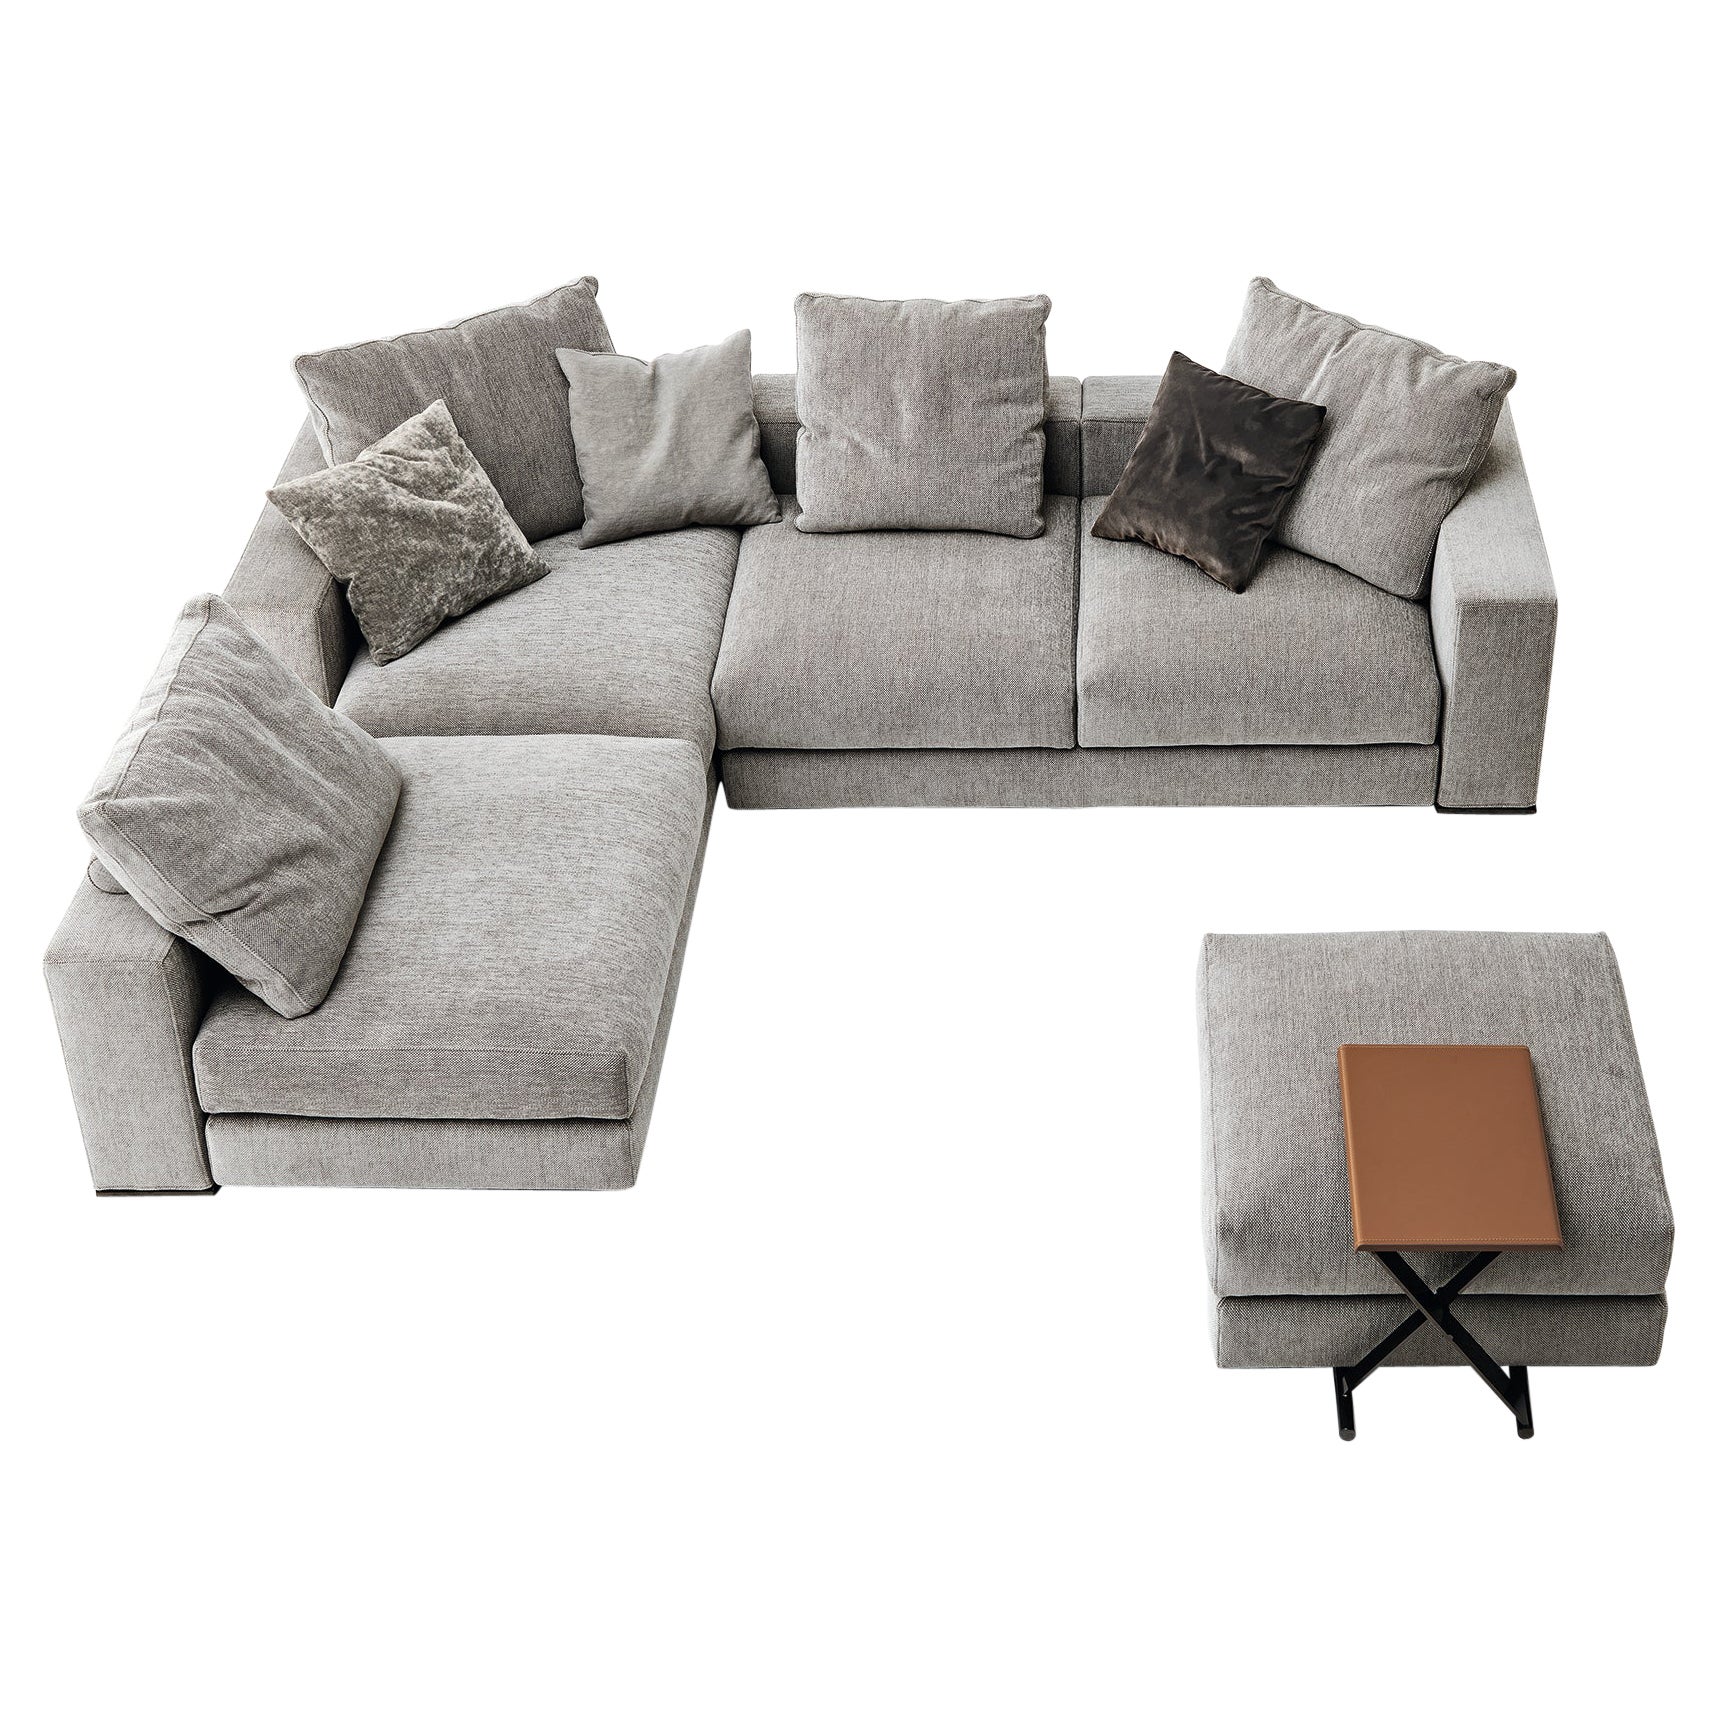 Ananta Class 23 Medium Sectional Sofa in Lusso Upholstery by Sergio Bicego